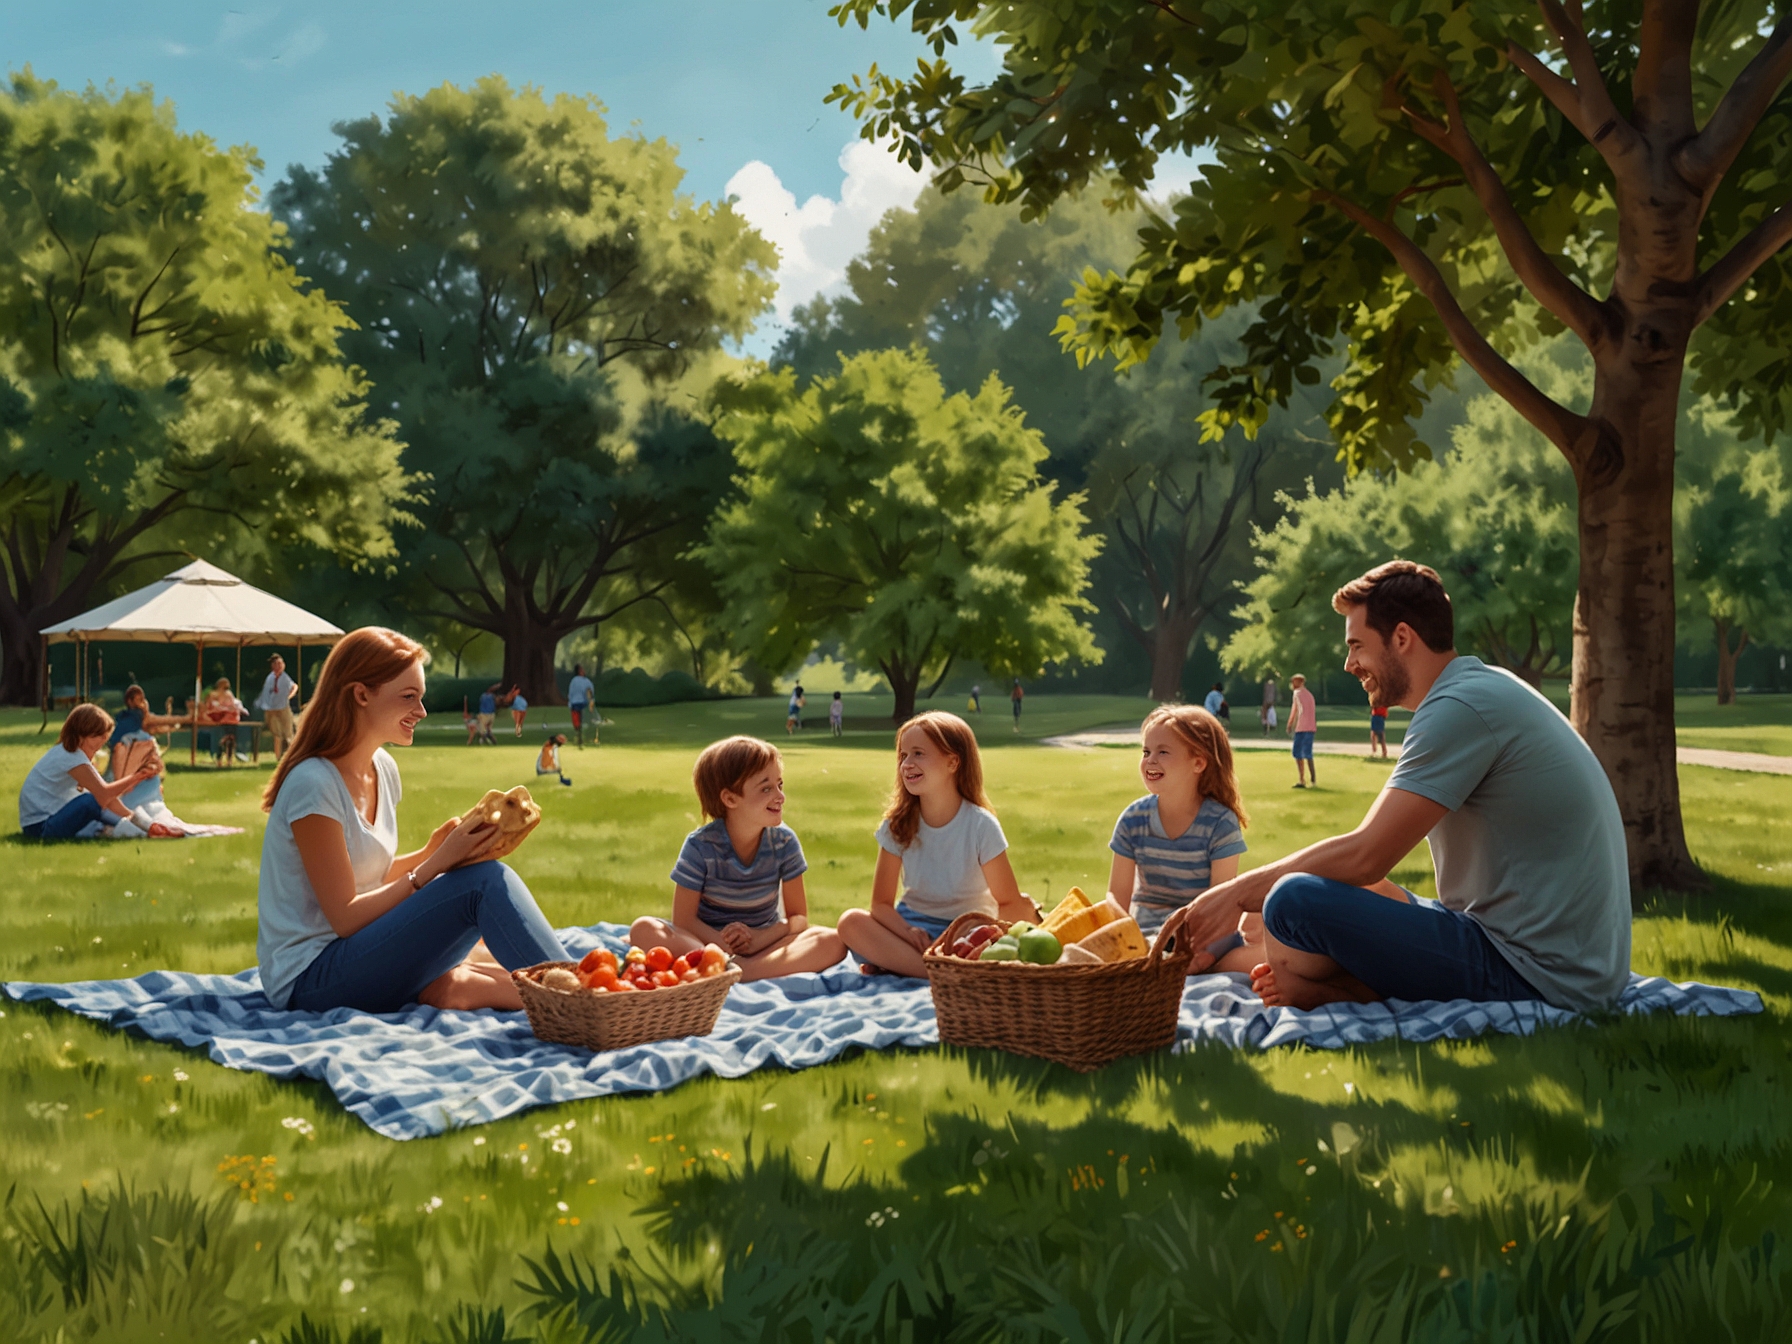 A family enjoying a picnic in a lush green park, with baskets of food, blankets on the ground, and children playing nearby, encapsulating the joy of International Picnic Day.